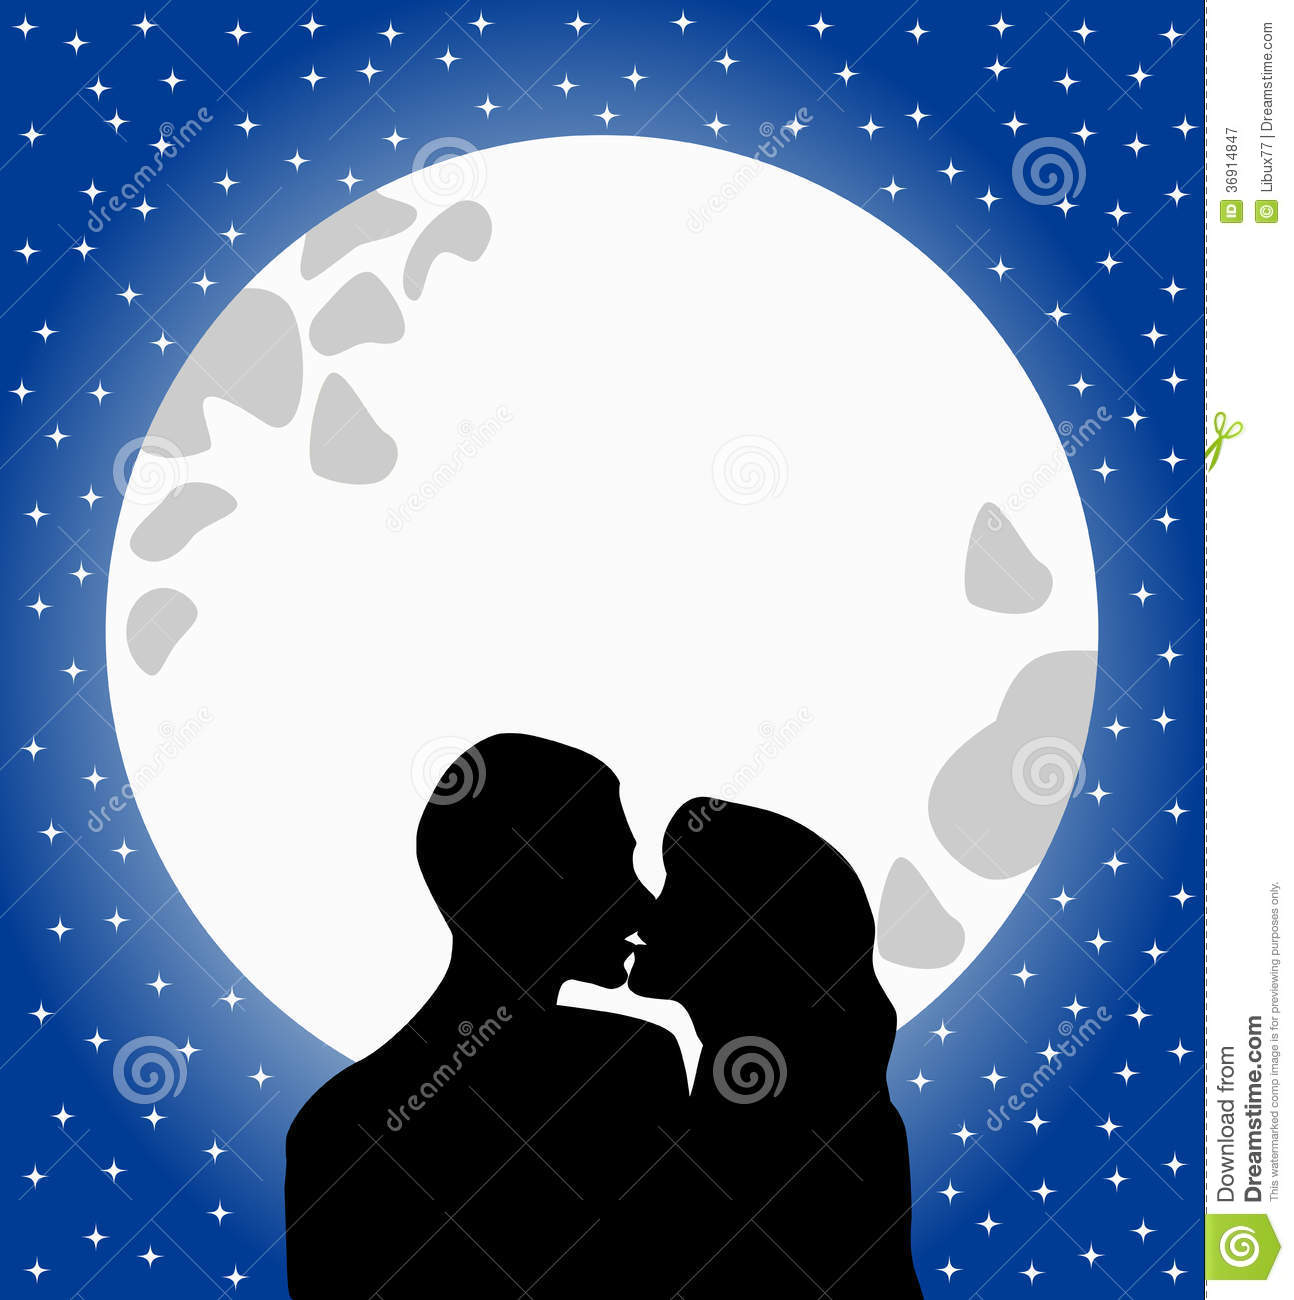 Lovers Silhouette Kissing At Moonlight Royalty Free Stock Photography    